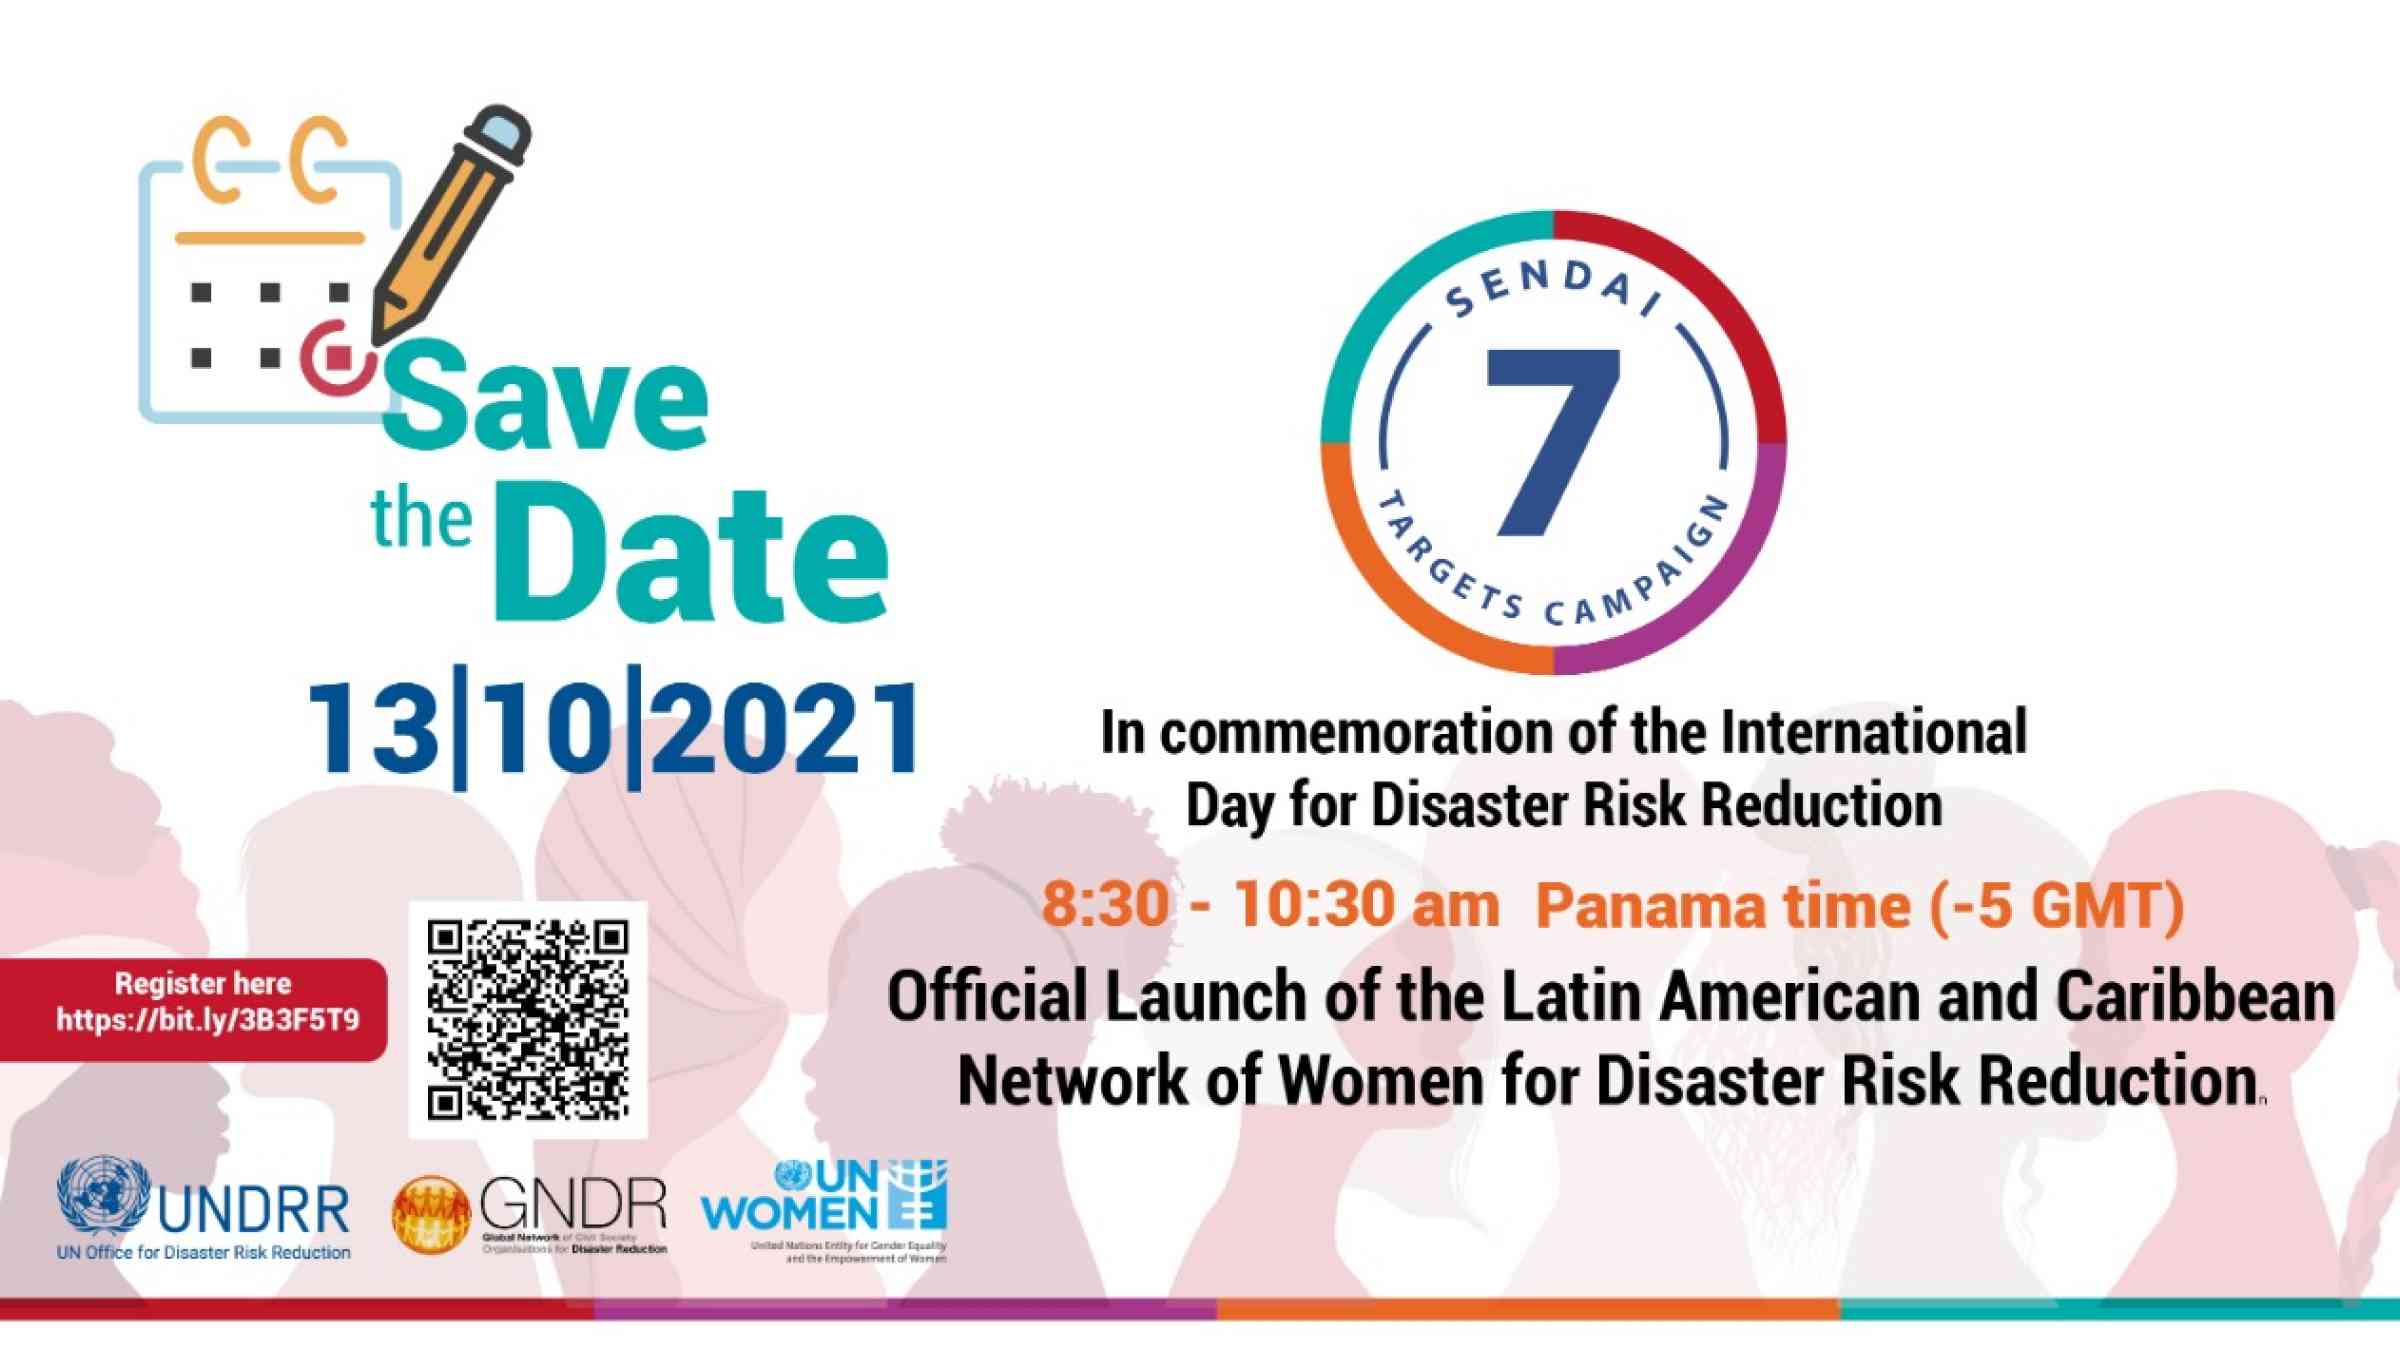 Launch of the Latin American and Caribbean Network of Women for Disaster Risk Reduction